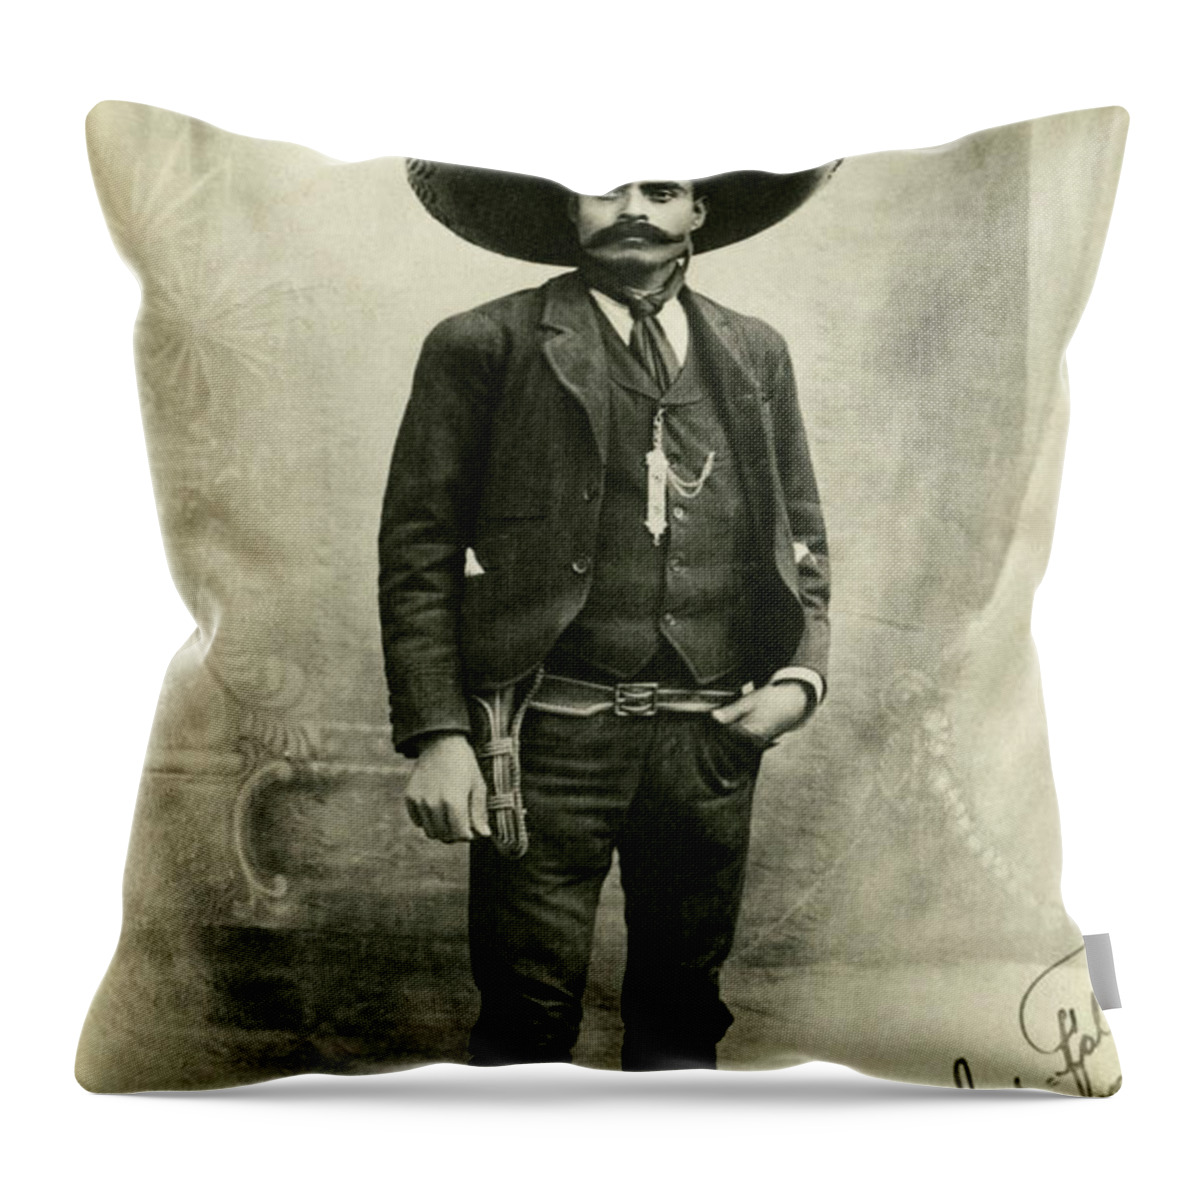 Emiliano Zapata Throw Pillow featuring the painting Emiliano Zapata, 1918 by American School